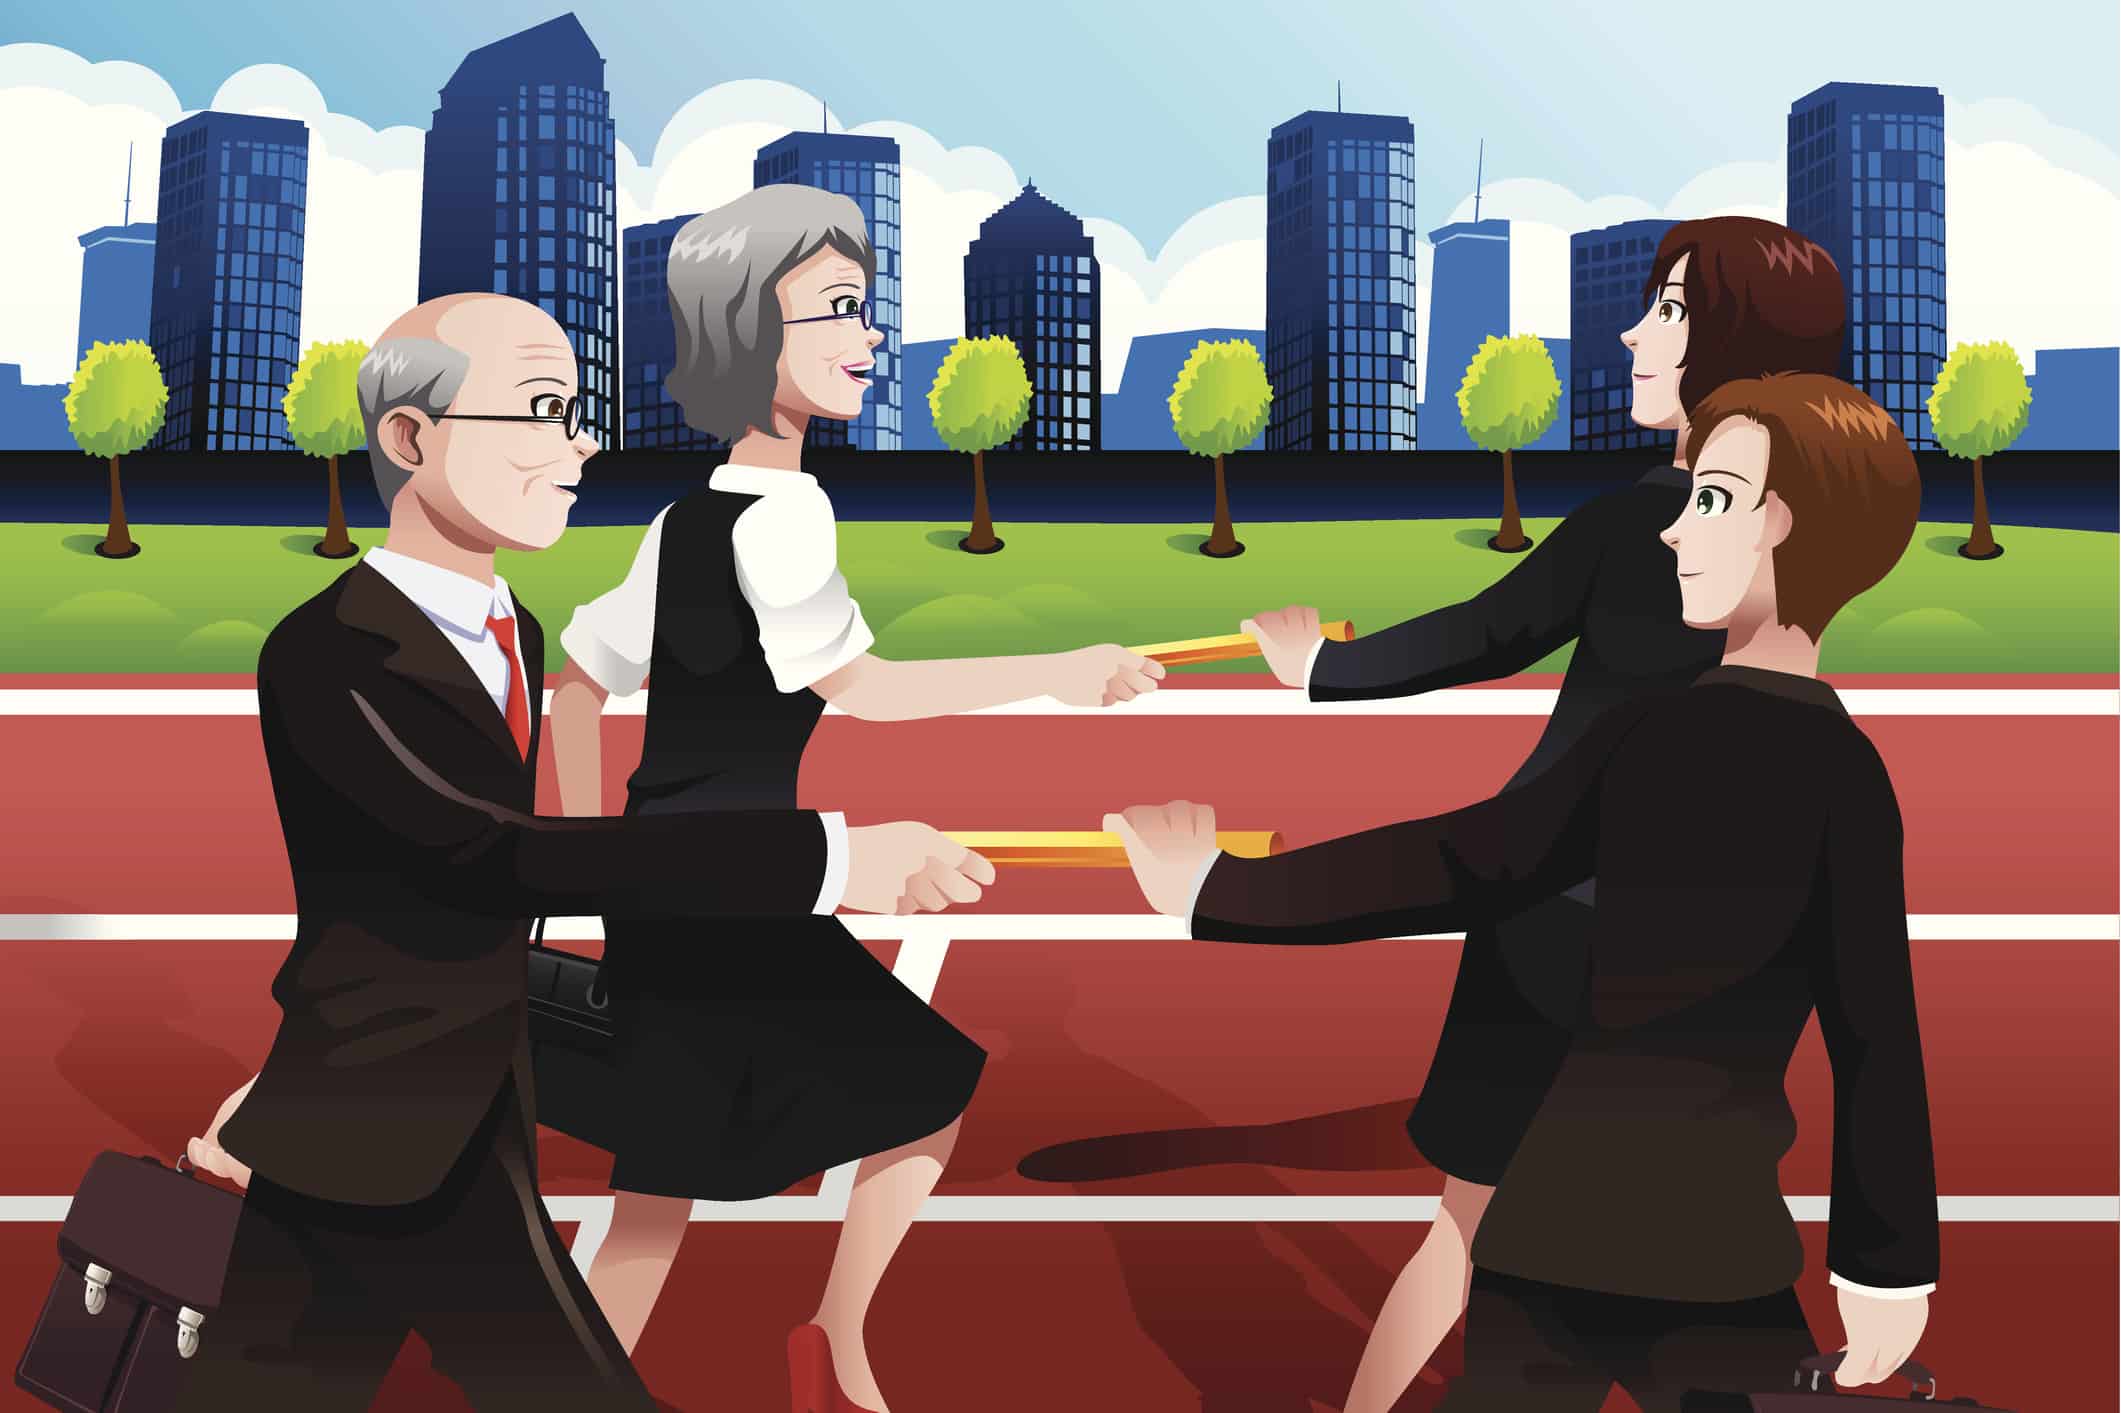 vector illustration of older business people passing batons to the younger generation